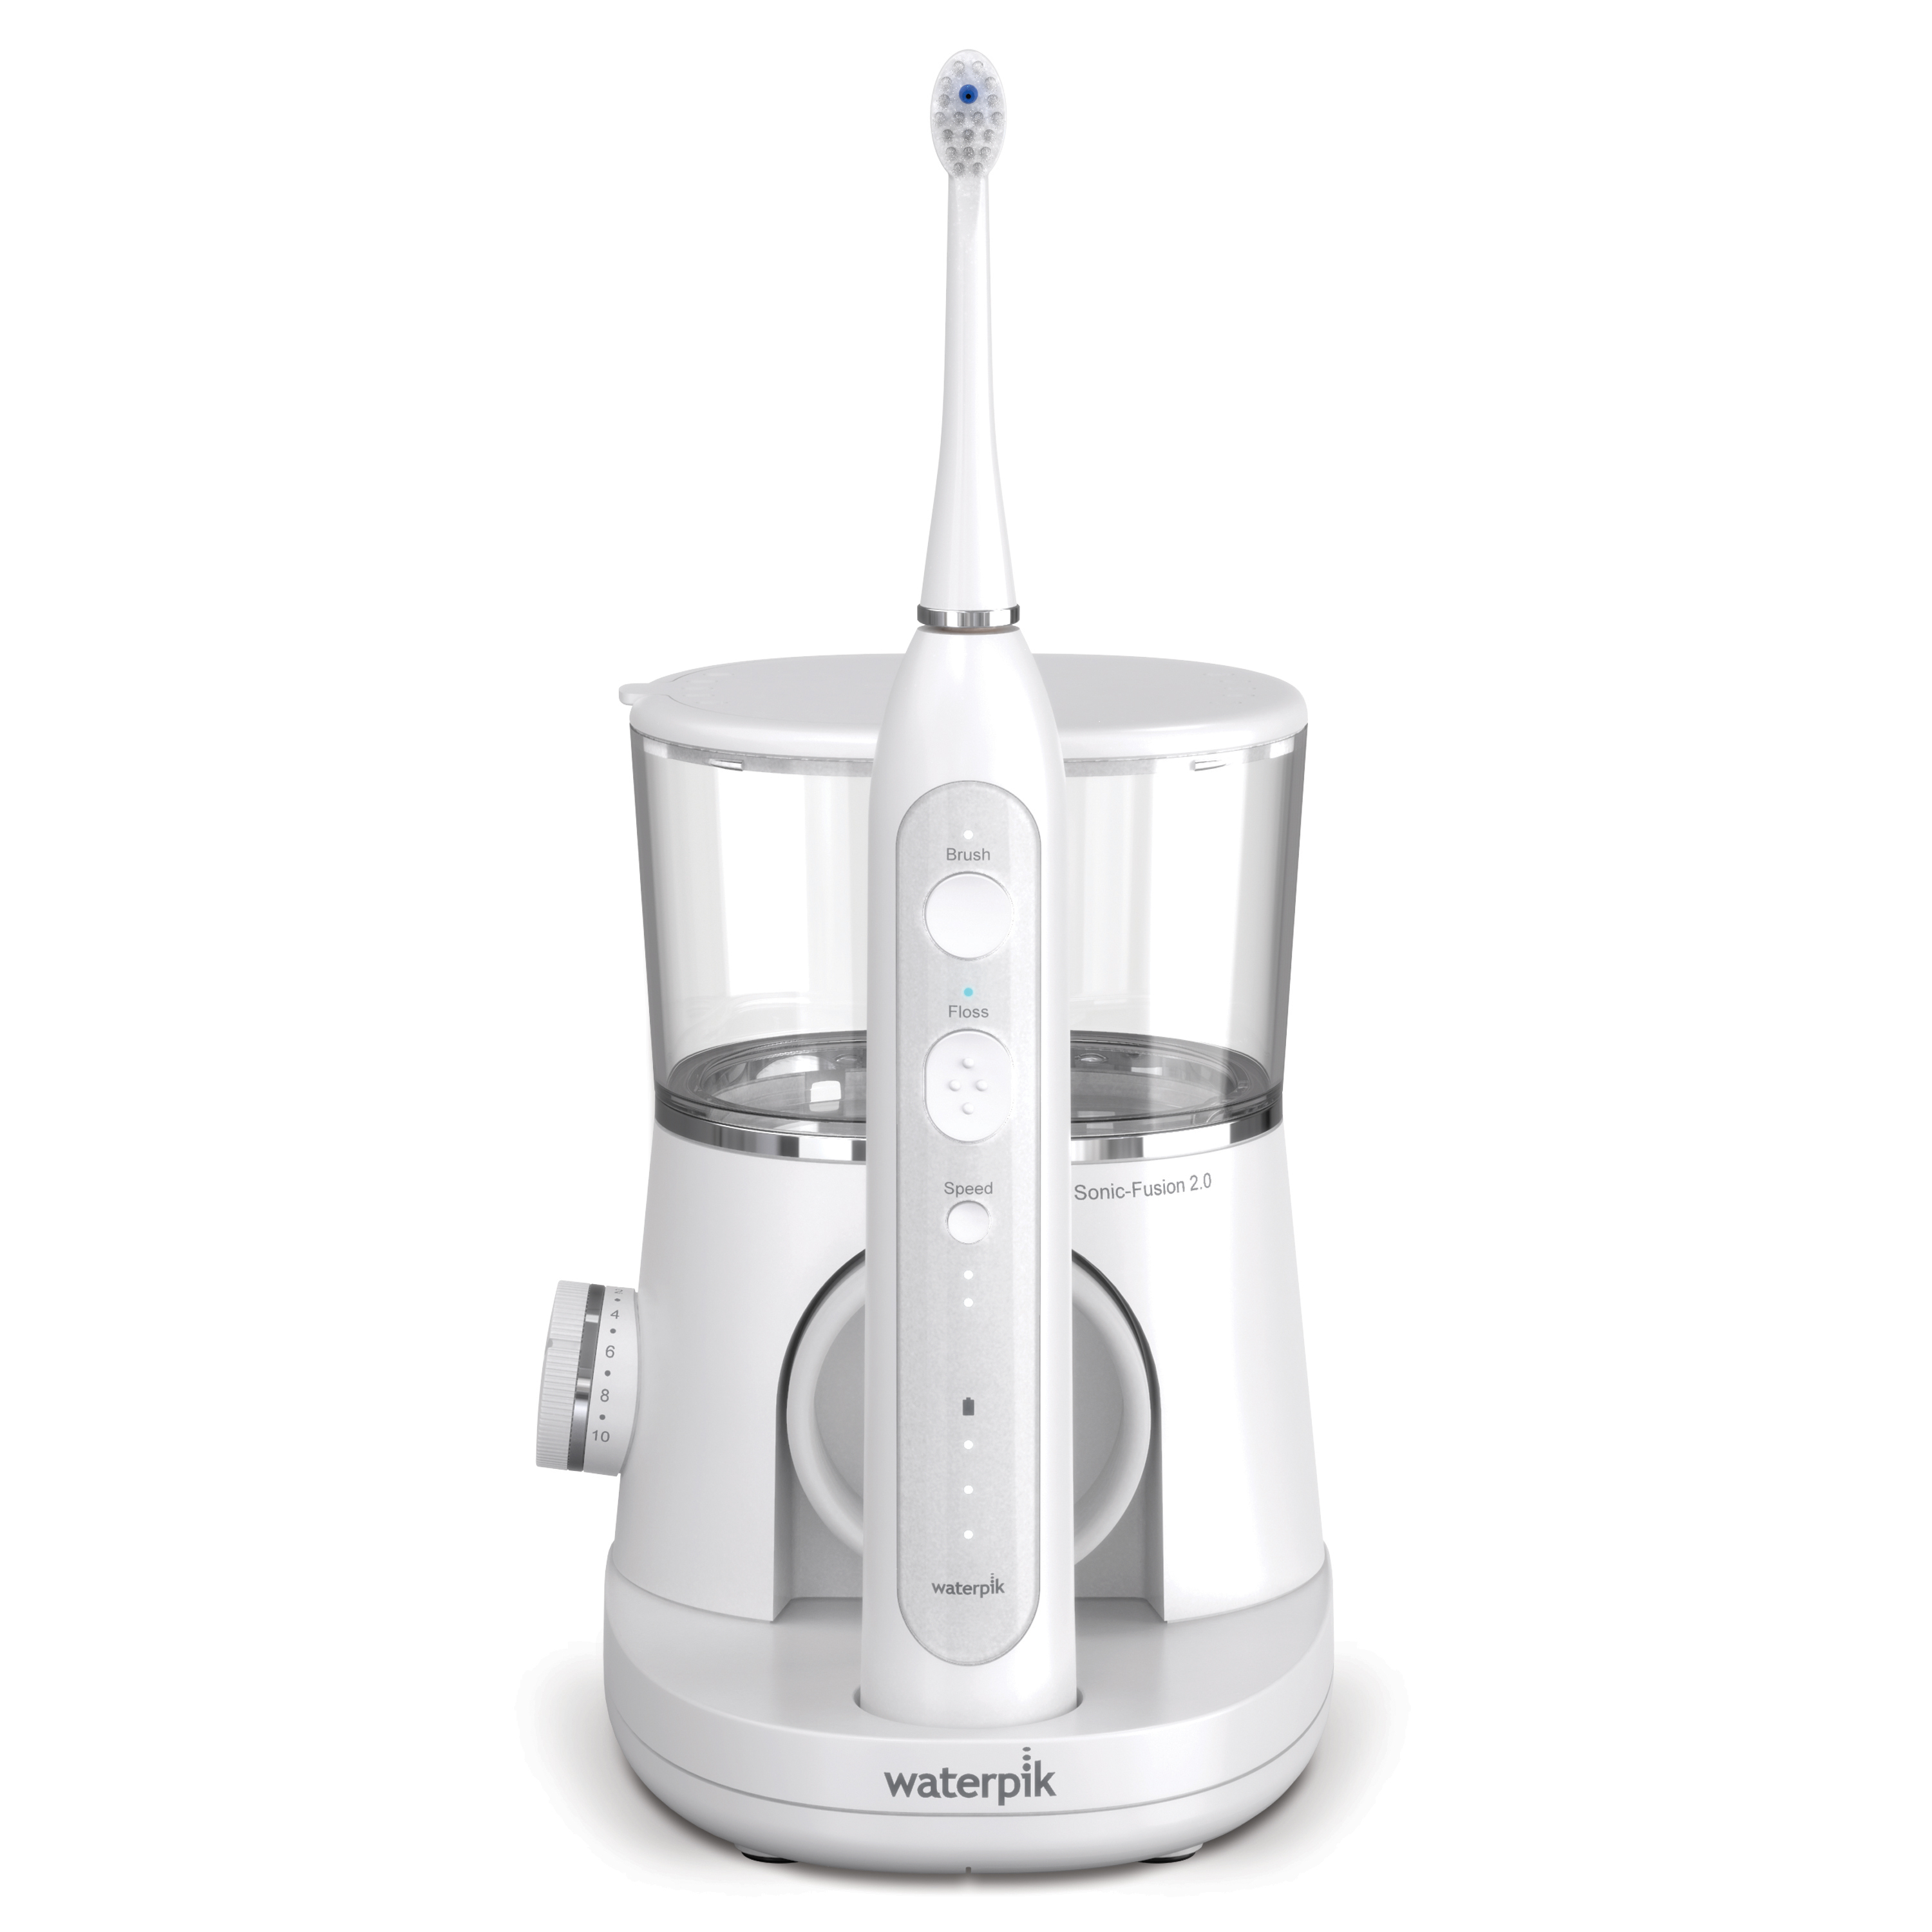 Waterpik Sonic-Fusion 2.0 Flossing Toothbrush, Electric Toothbrush & Water Flosser Combo, White - image 1 of 17